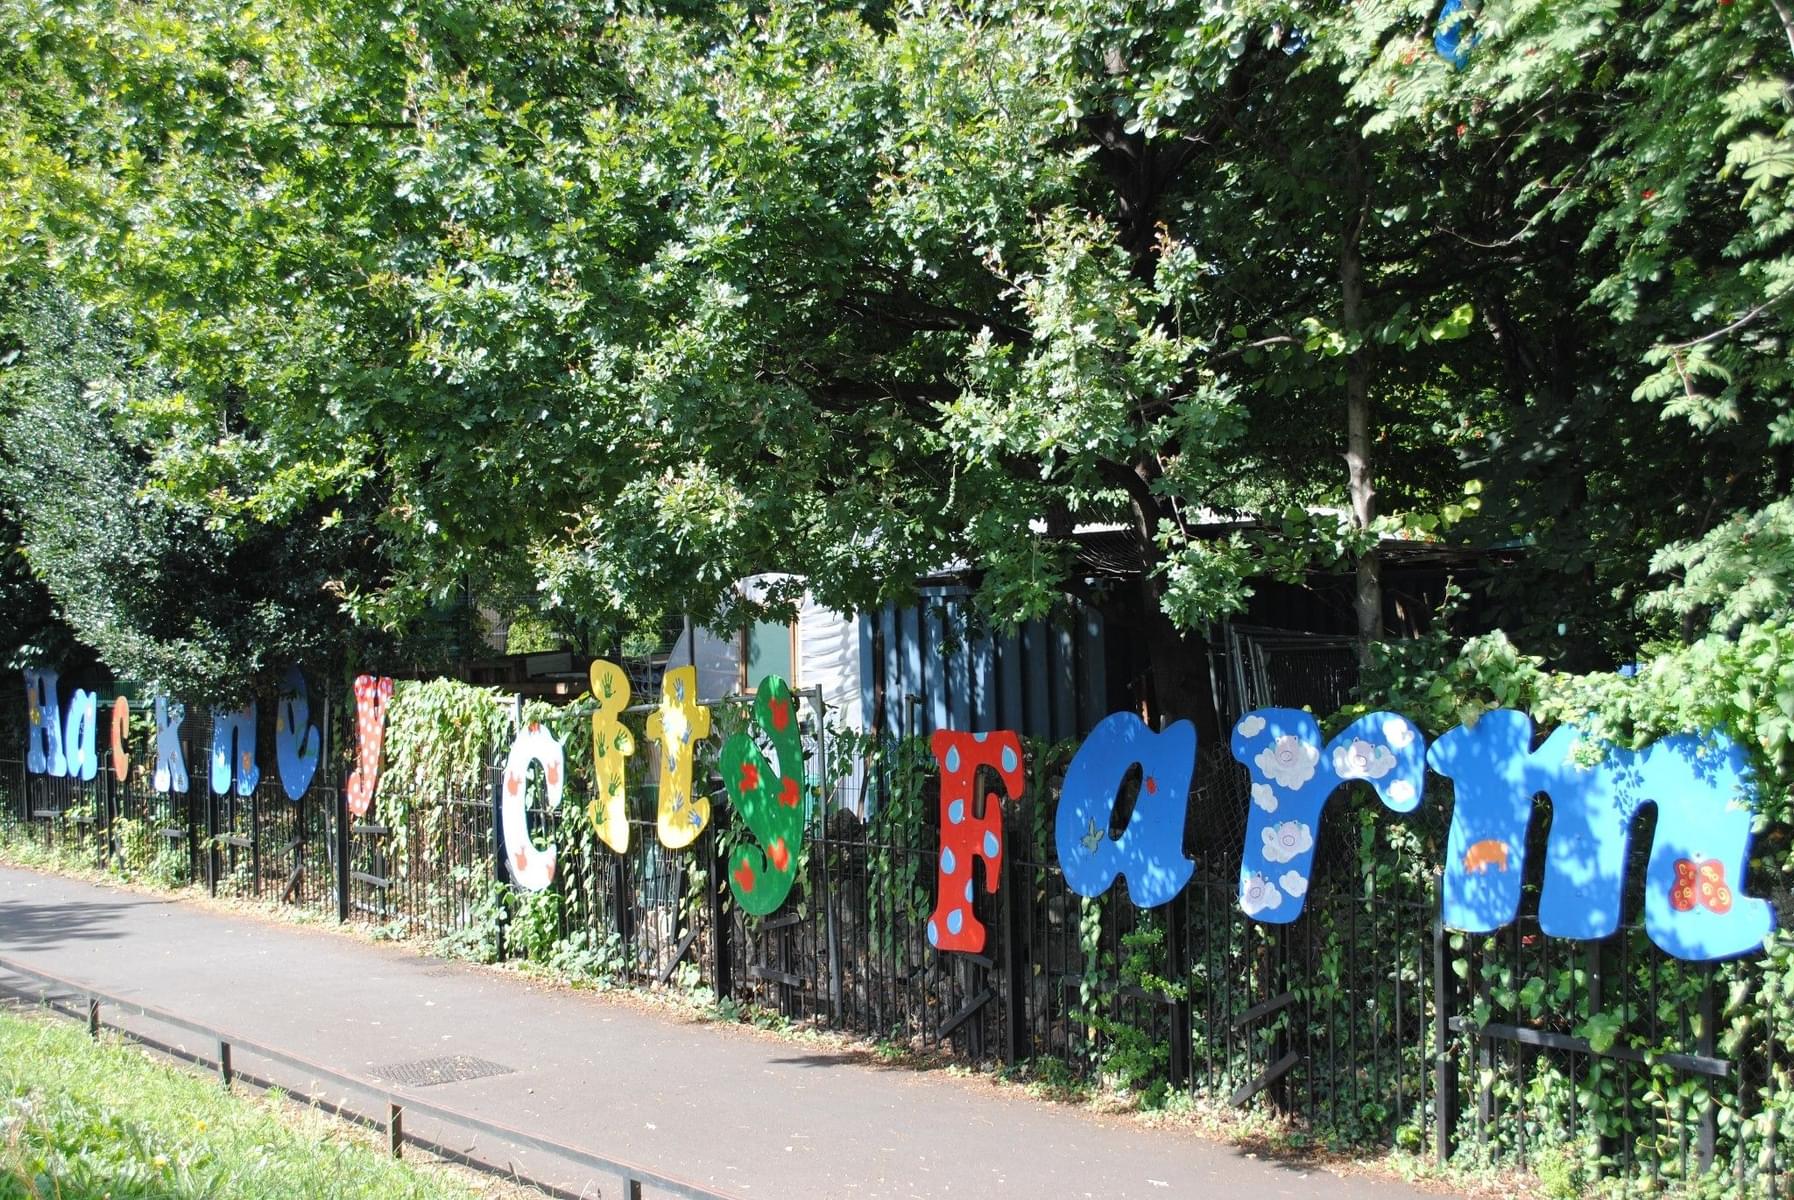  Pay A Visit To The Hackney City Farm